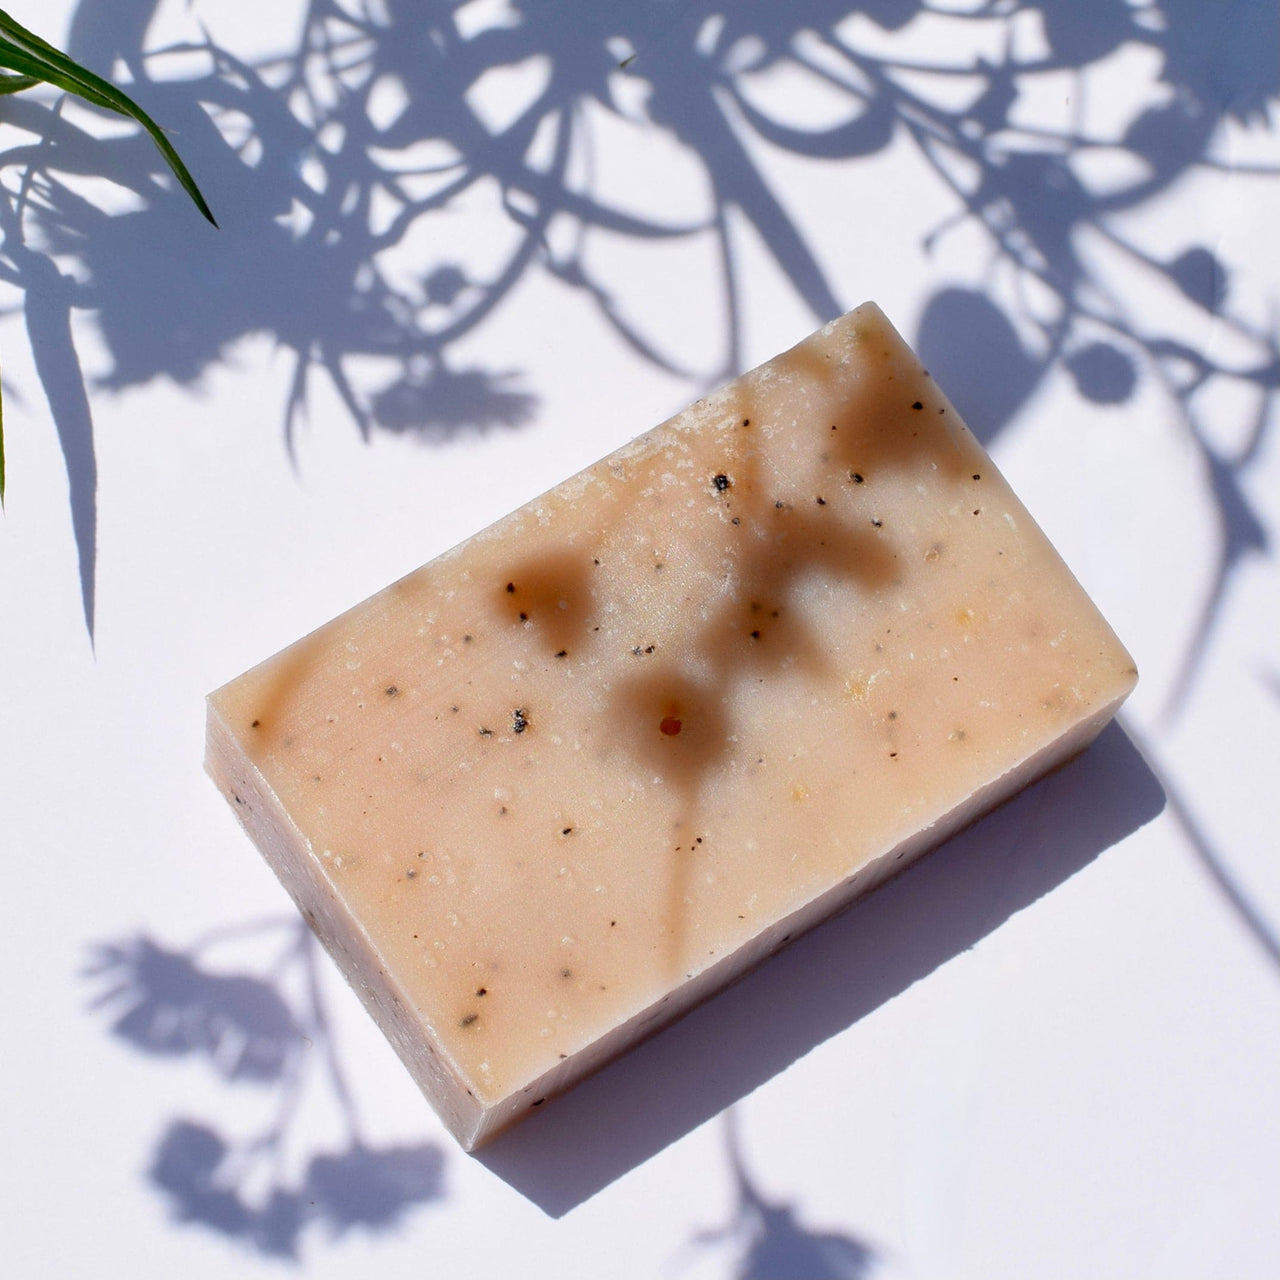 *Limited Edition* Exfoliating Apricot Kernel and Coffee Soap